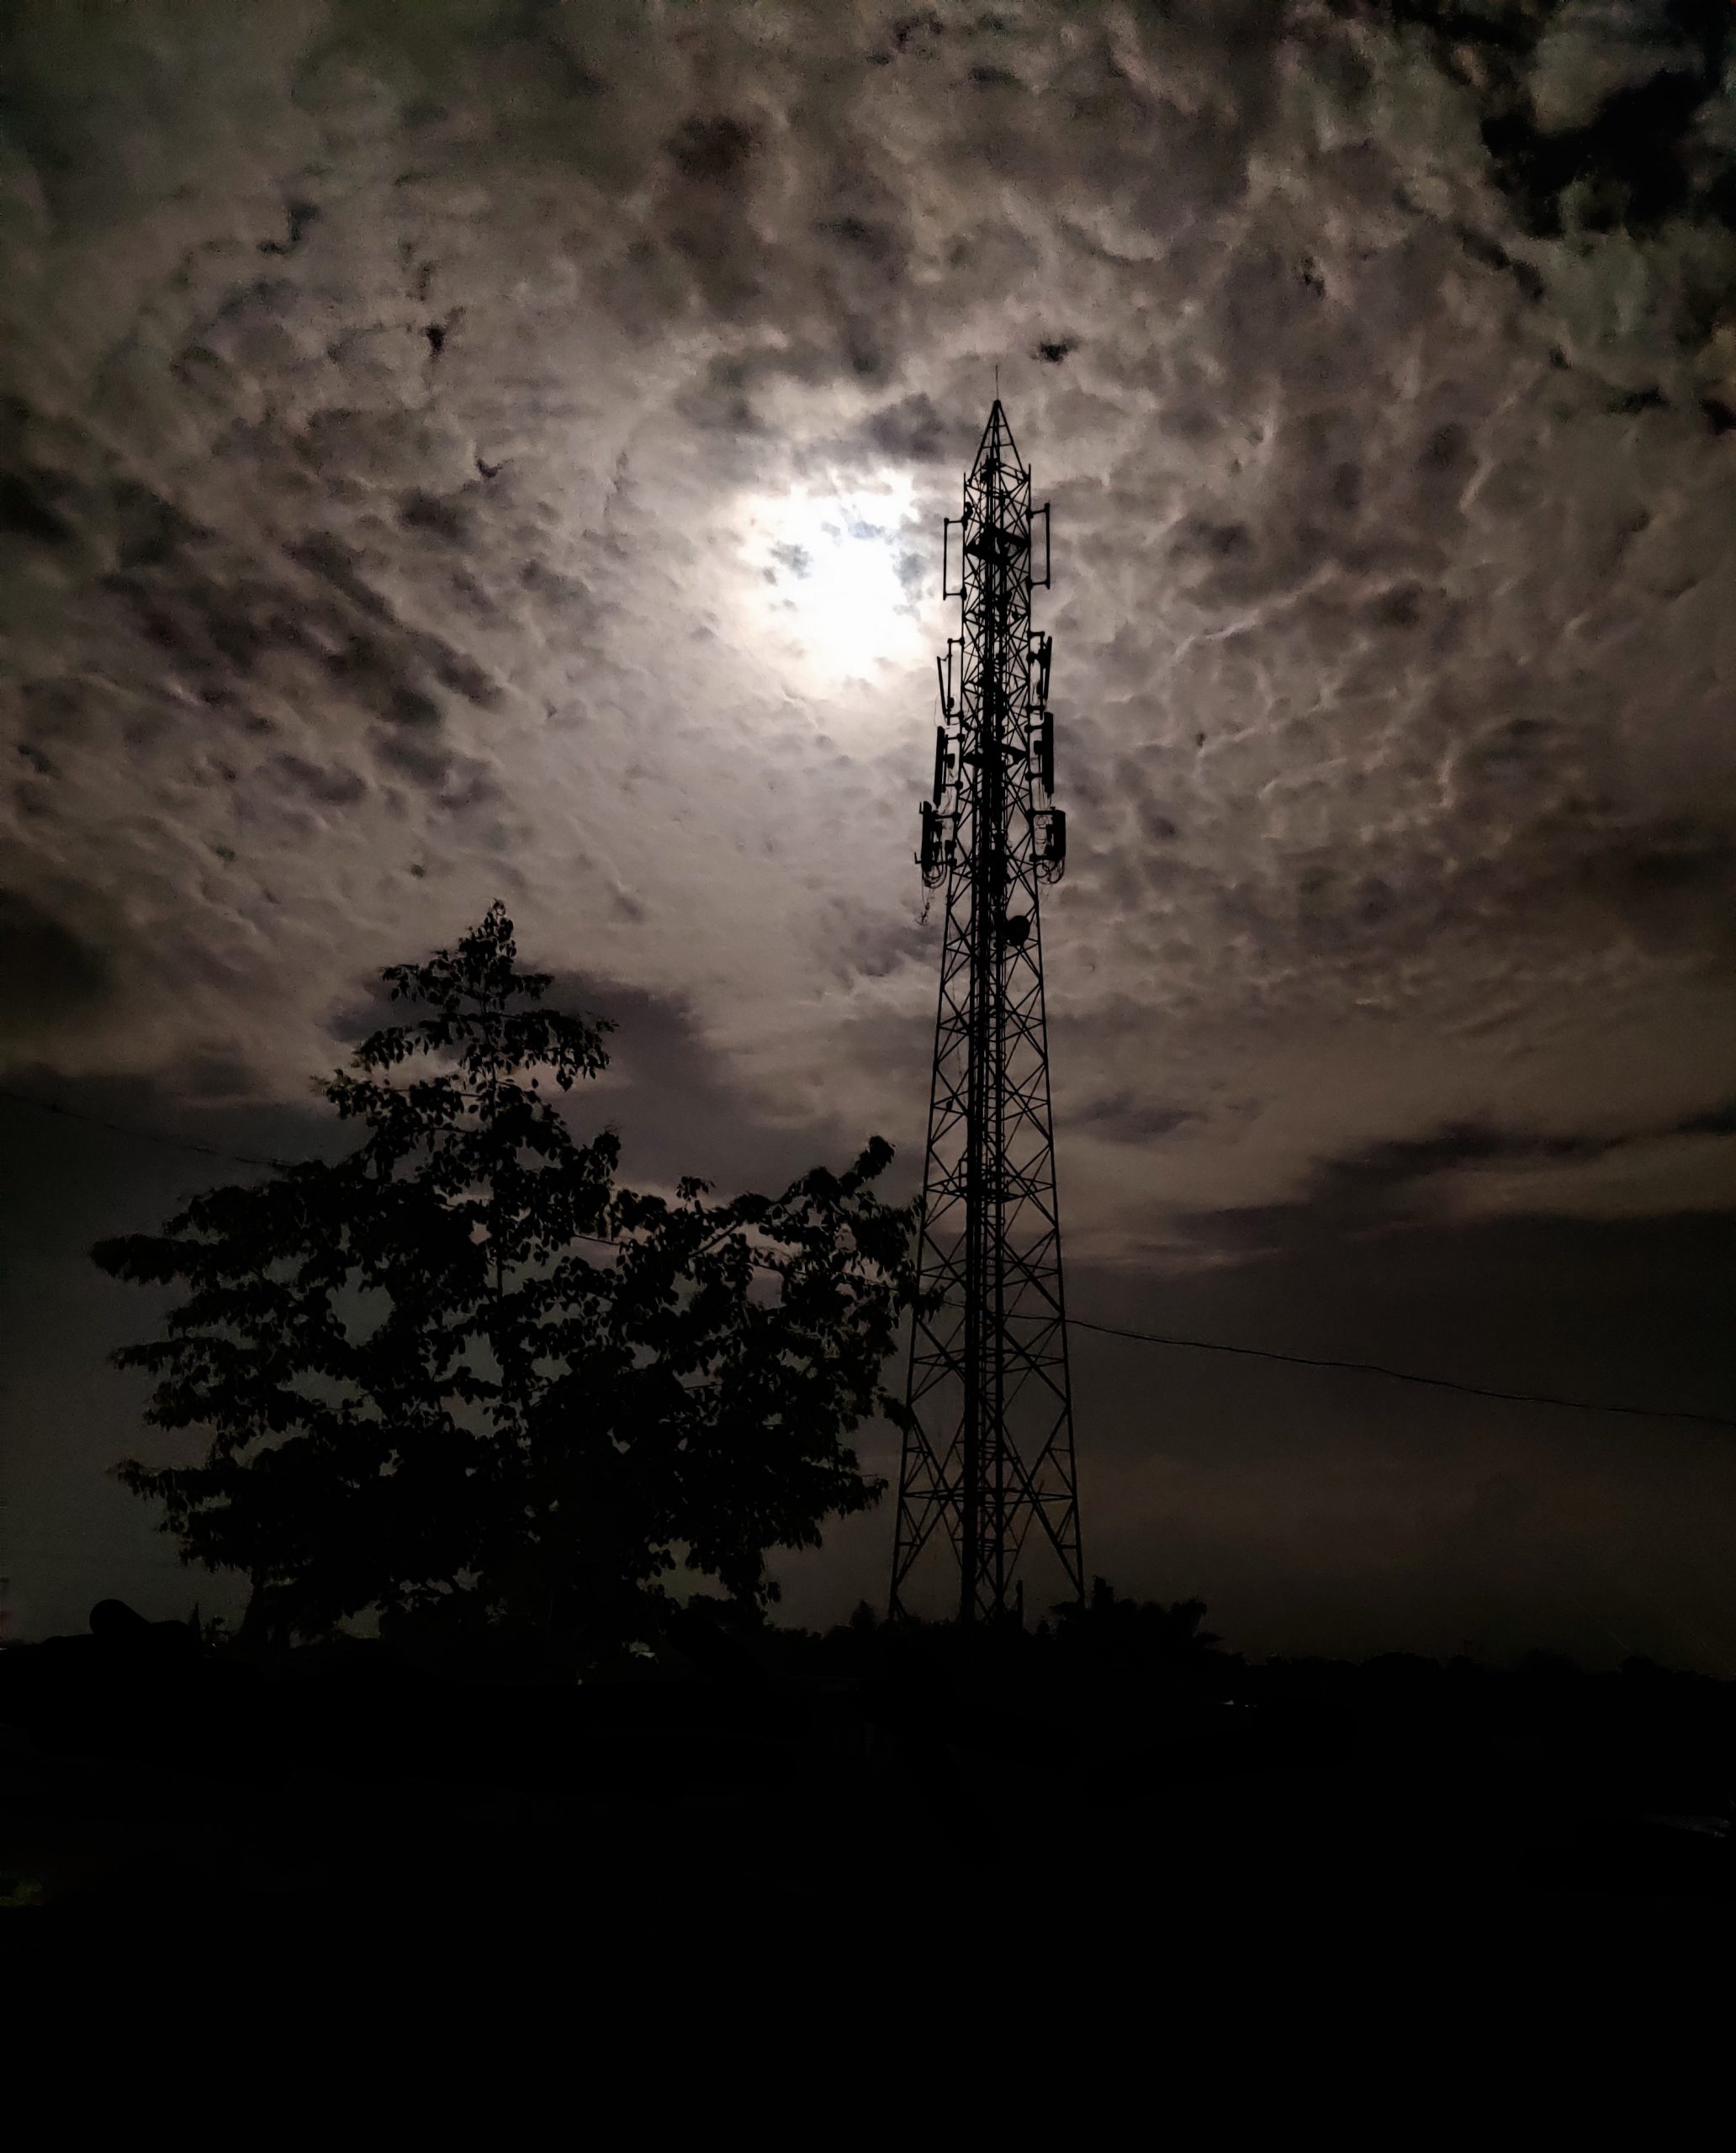 Clouds over a telcom tower